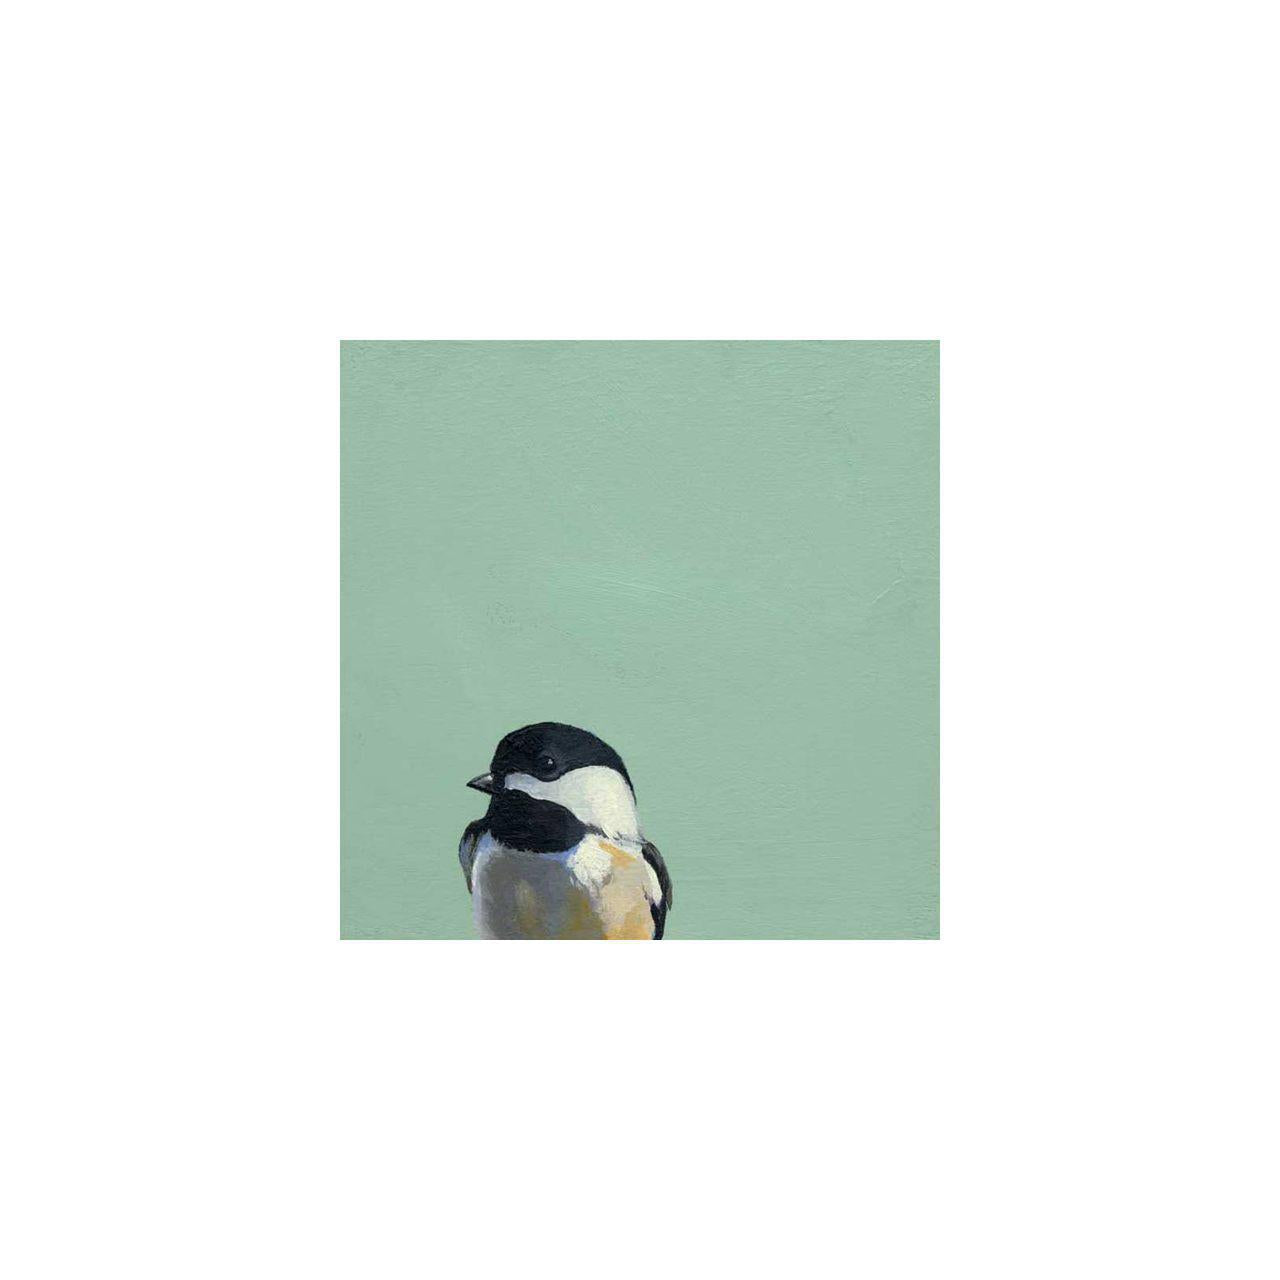 Wall Art - Chickadee on 6in x 6in Wood Panel by The Mincing Mockingbird